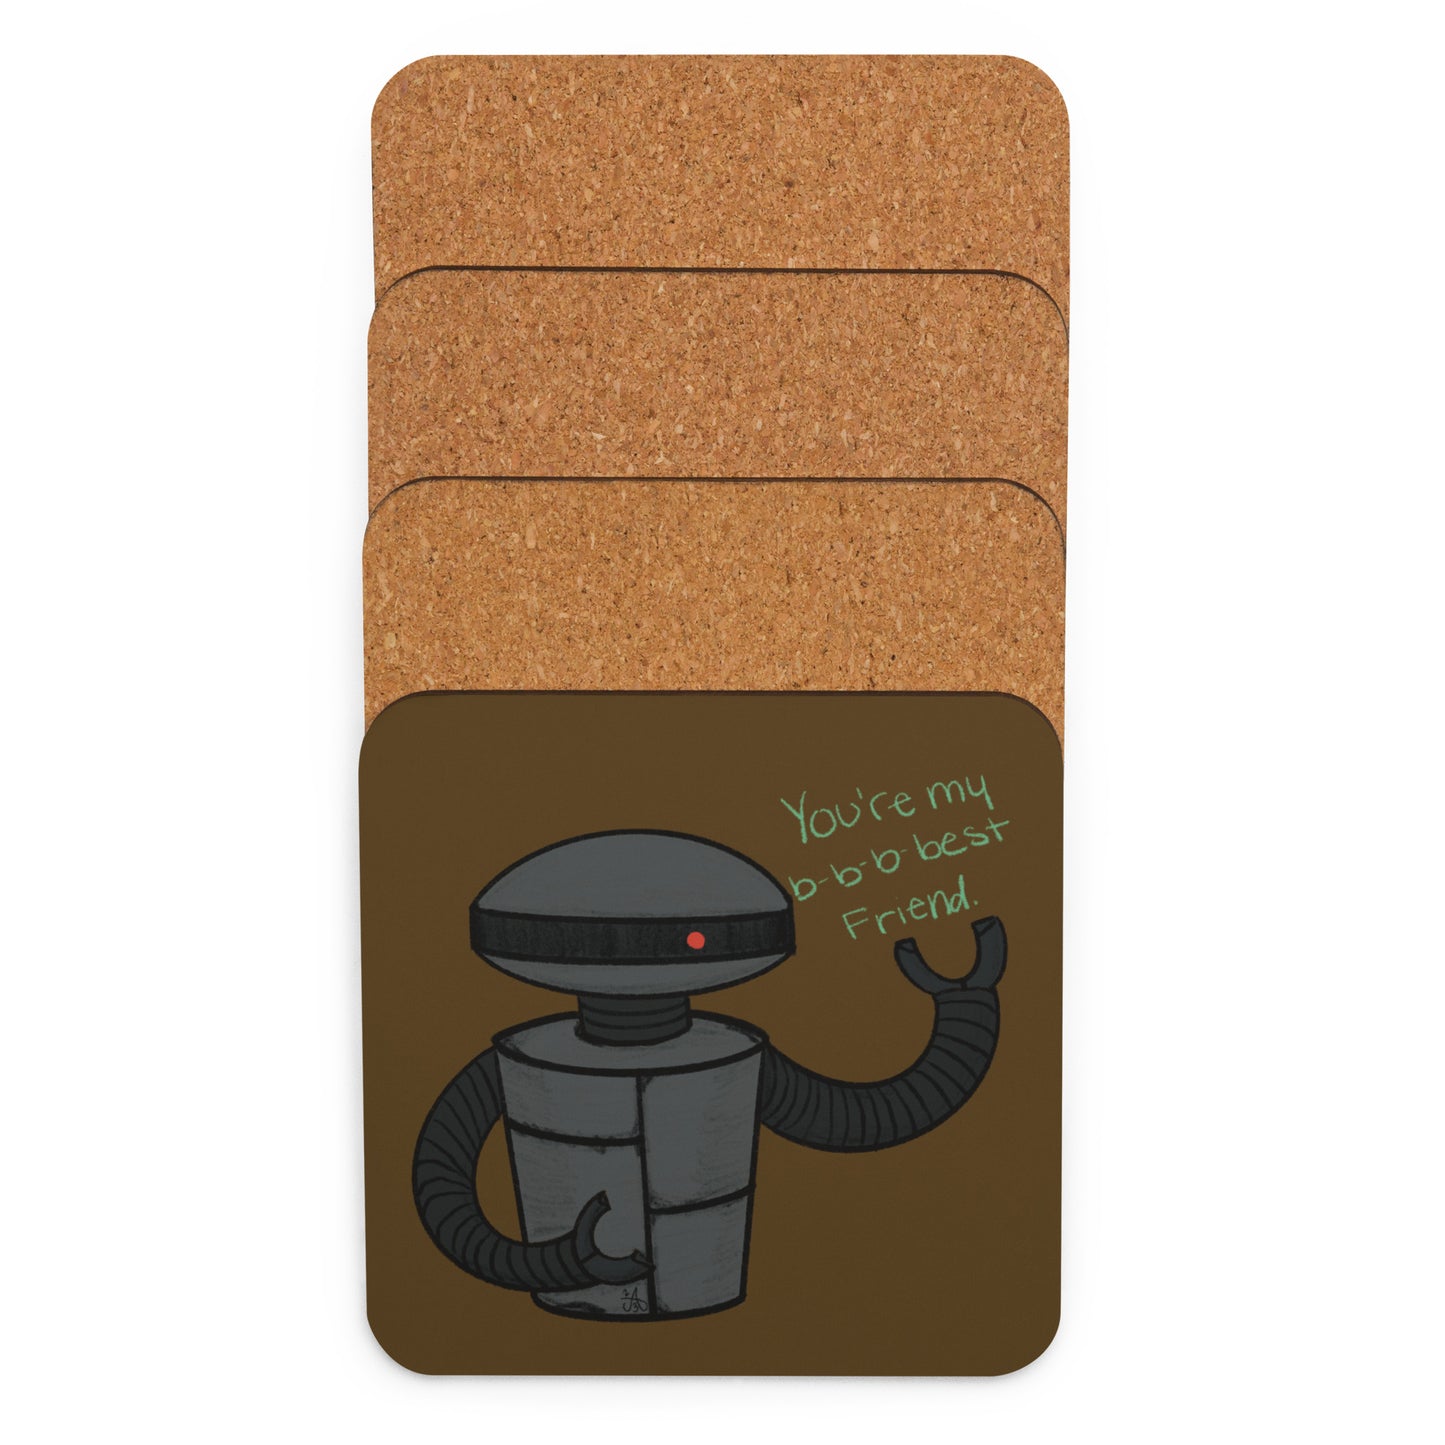 A stack of coasters face down show the cork backing except the top one which shows an illustration of a grungy robot saying "You're my b-b-best friend."